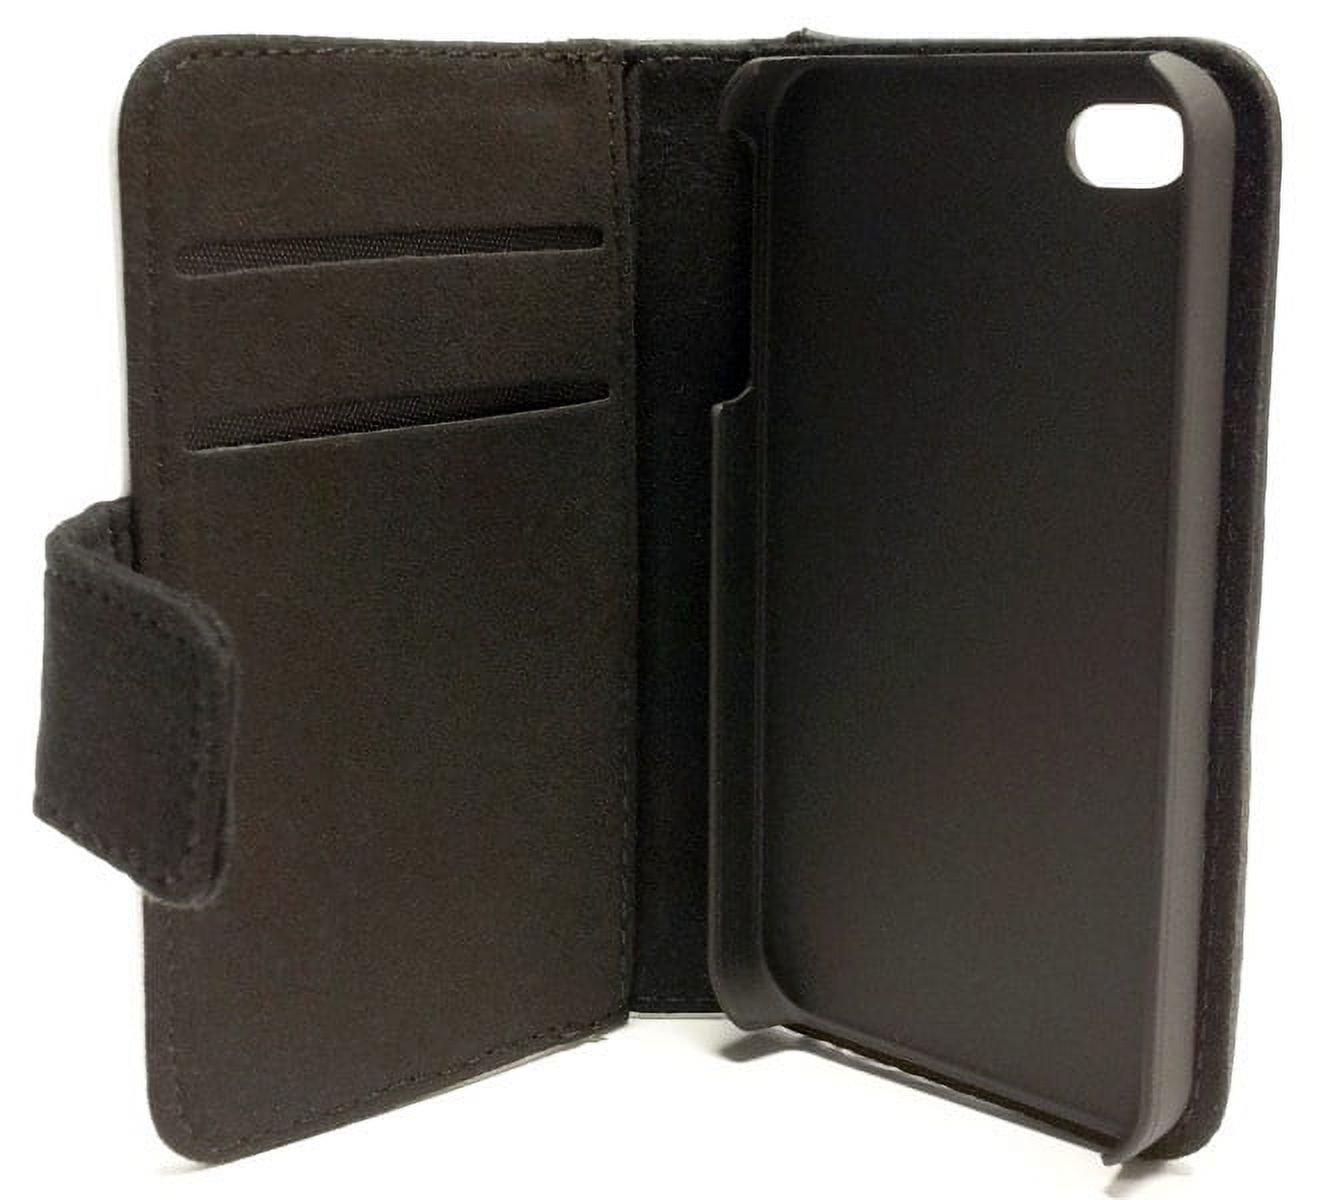 Howling Wolf Wallet Style Cell Phone Case with 2 Card Slots and a Flip Cover Compatible with the Apple iPhone 4 and 4s Universal - image 3 of 4